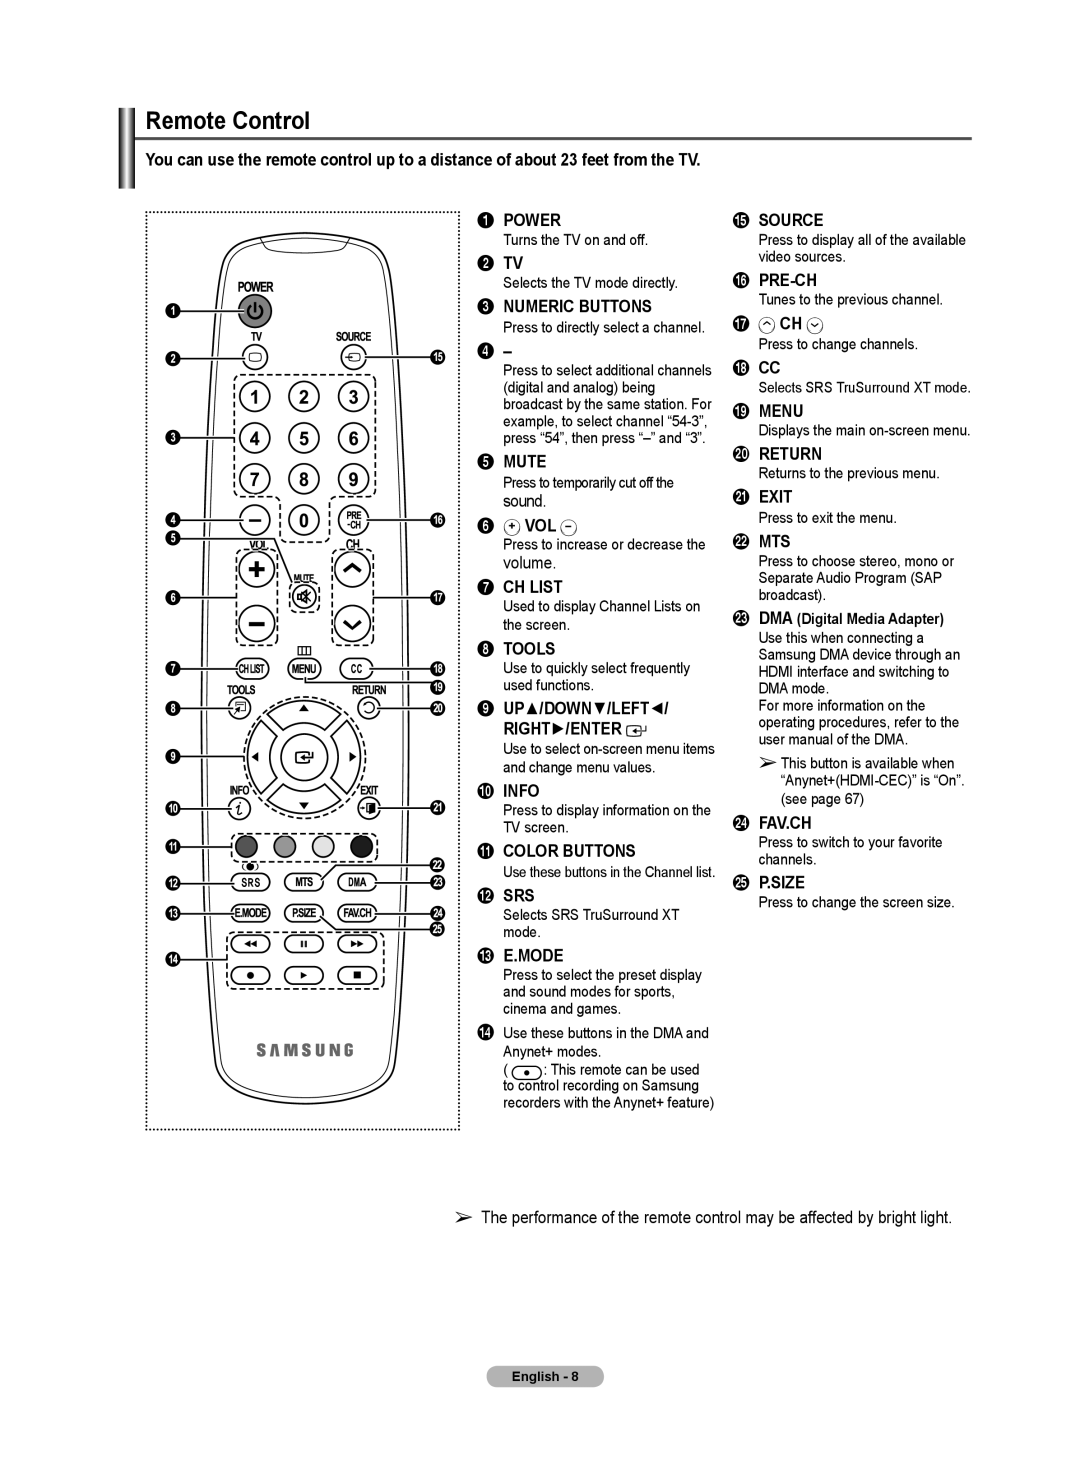 Samsung 510 Power, 2 TV, Mute, Vol, Ch List, Tools, 9 UP/DOWN/LEFT RIGHT/ENTER, Info, Color Buttons, Source, Pre-Ch, Menu 